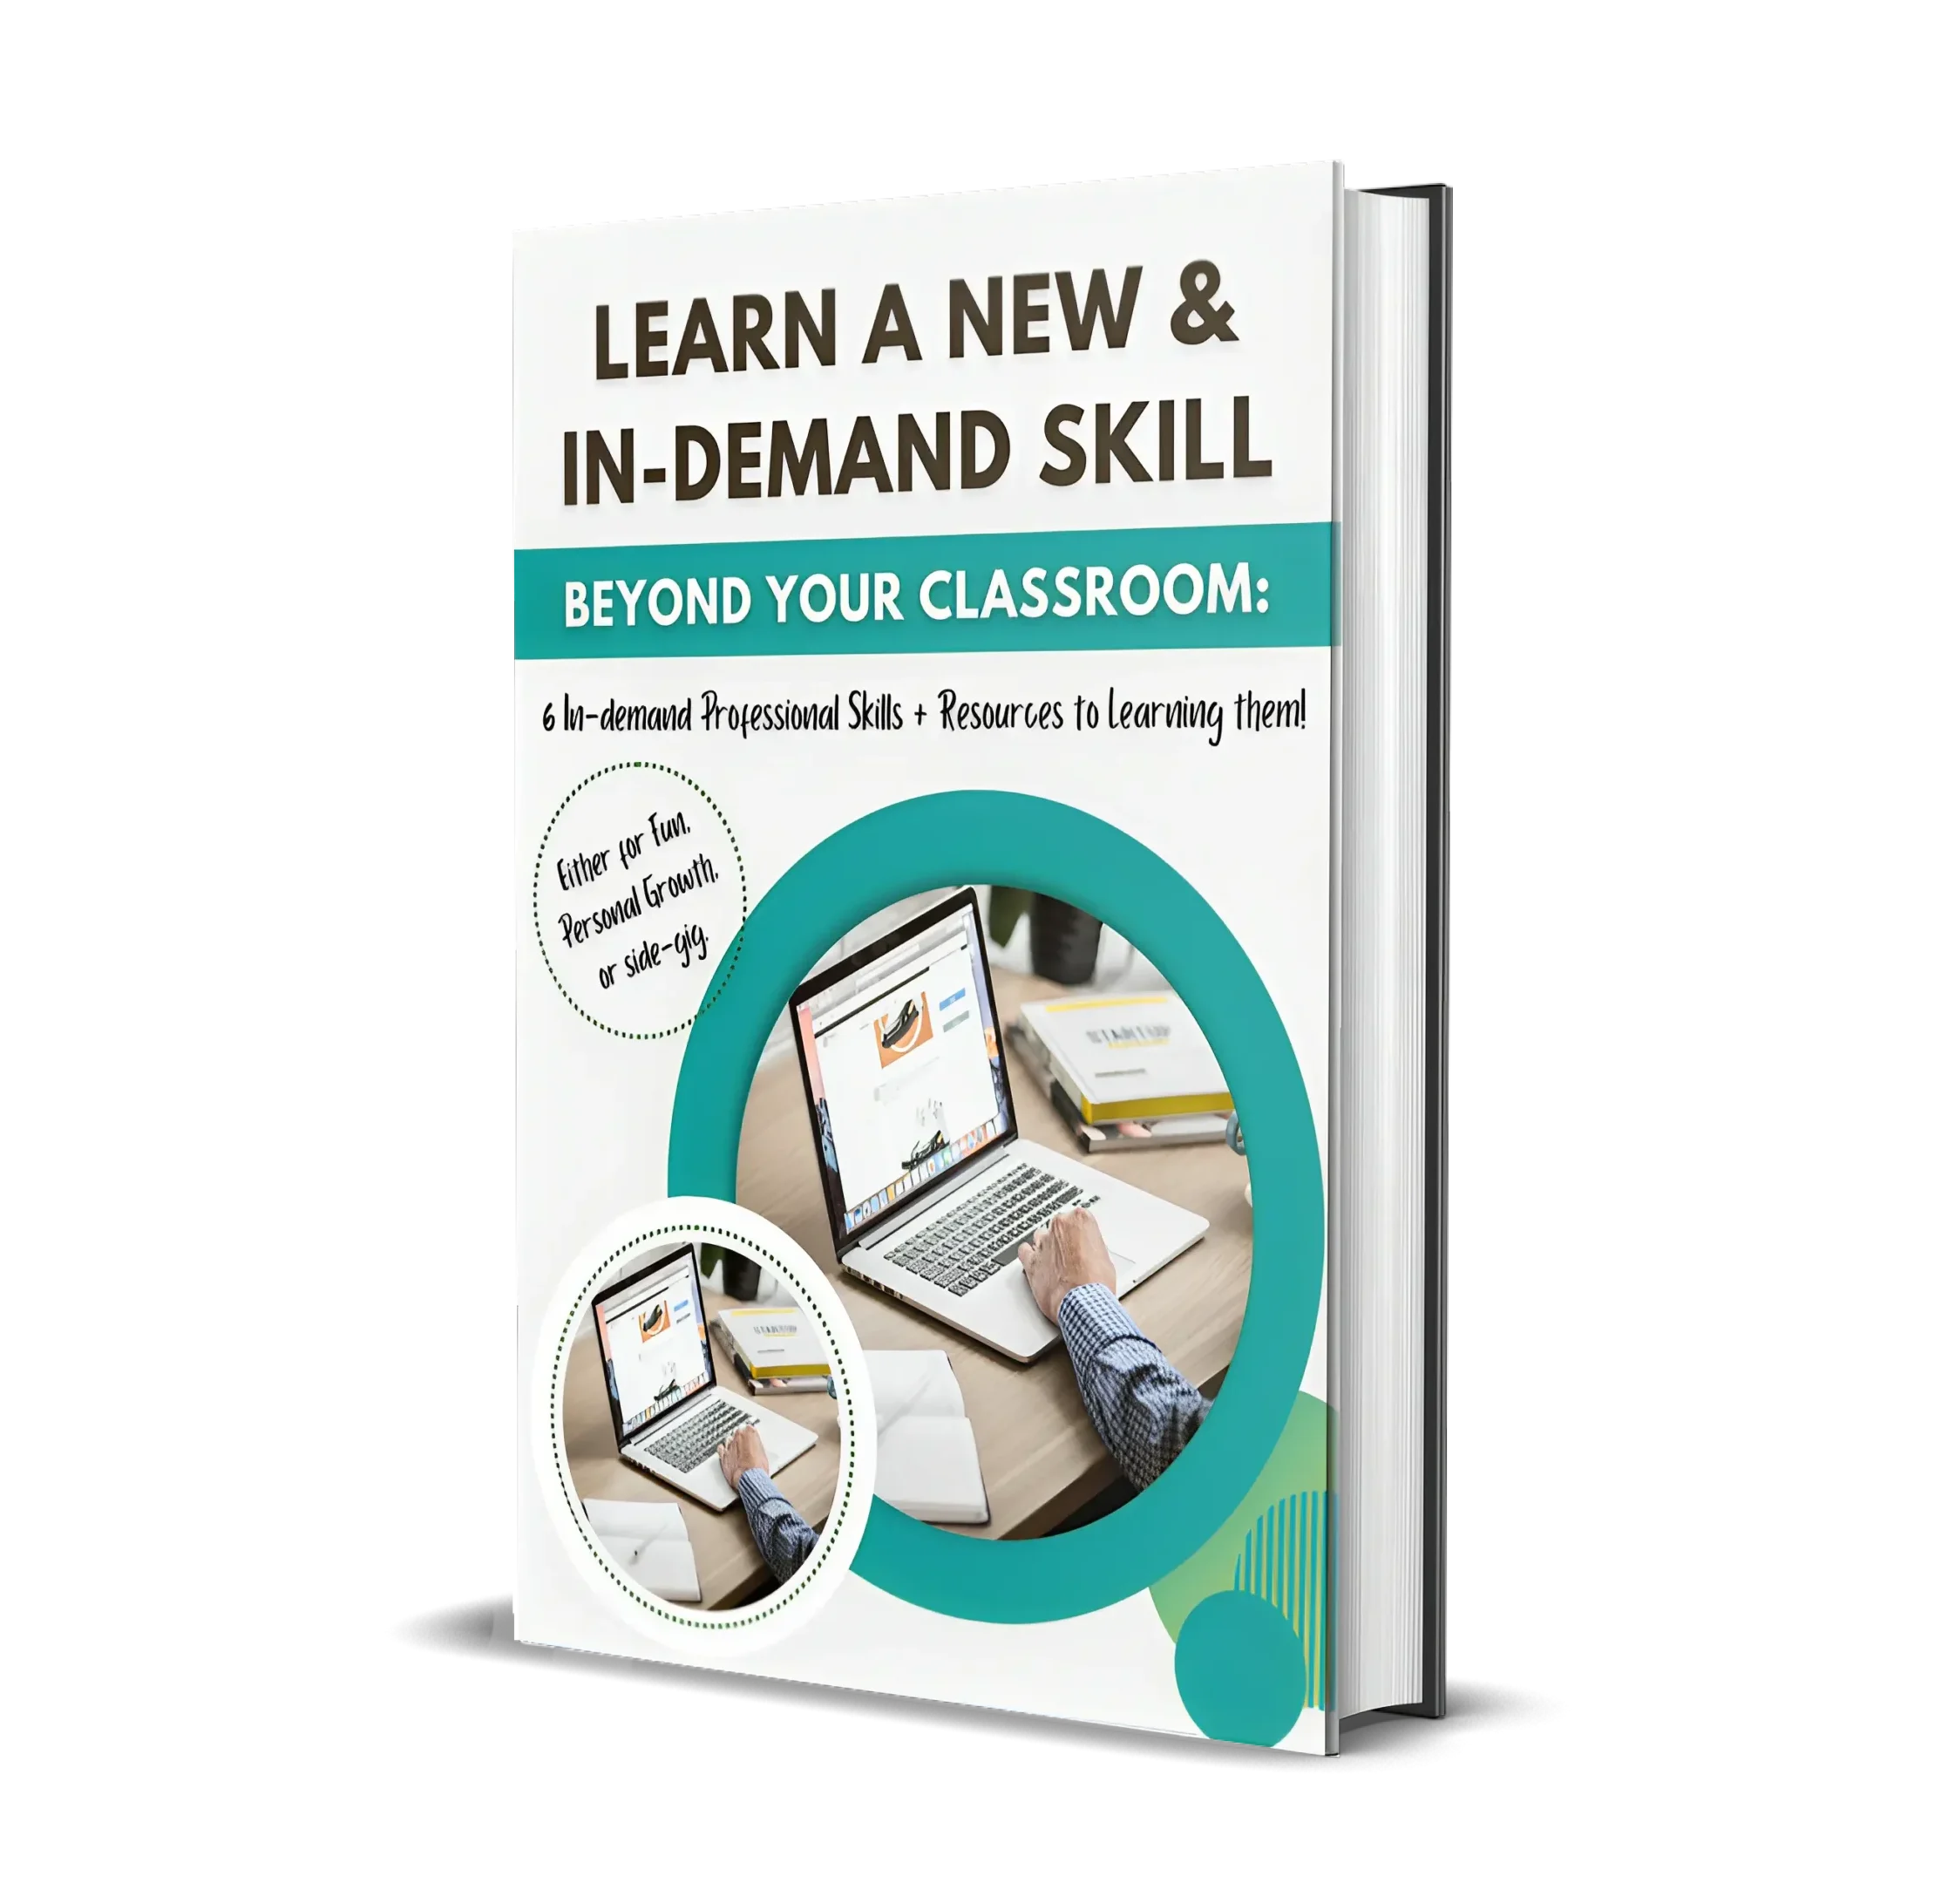 Download Free E-book "Learn New and In-demand Skills Beyond Your Classroom"